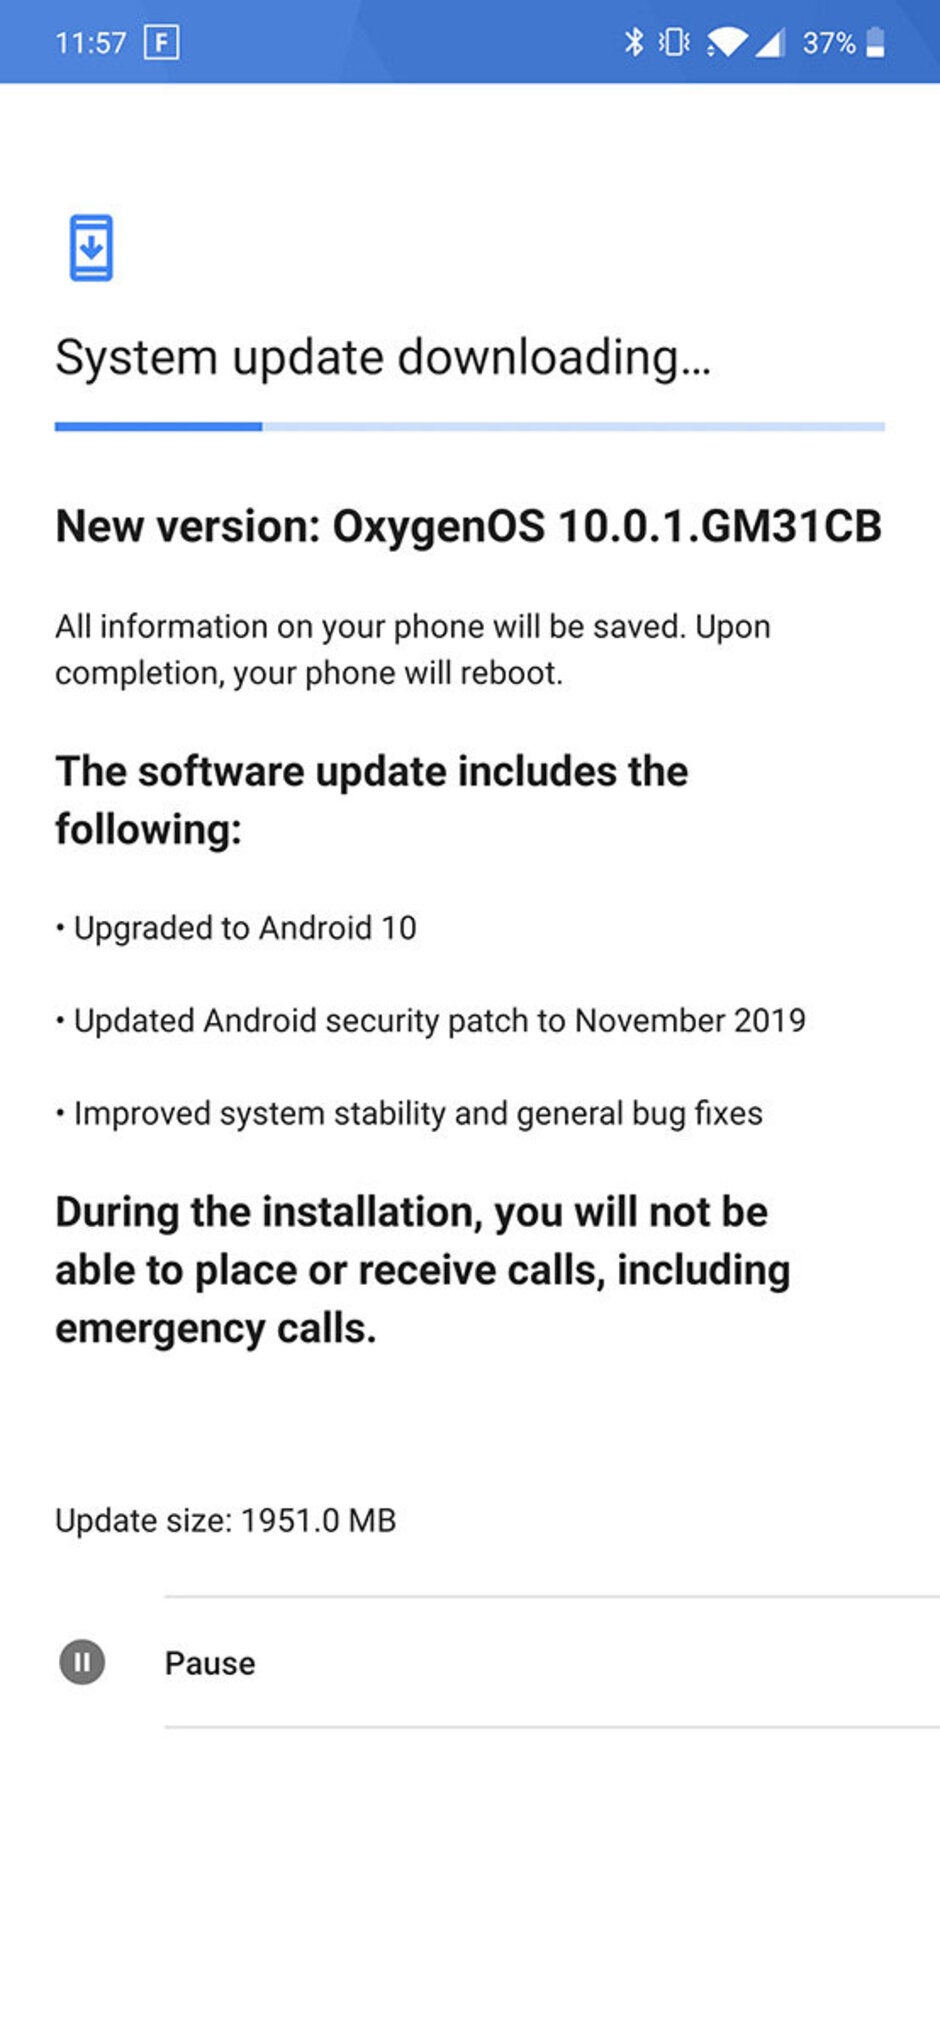 Android 10 update for T-Mobile OnePlus 7 Pro - OnePlus 7 Pro getting Android 10 update at T-Mobile